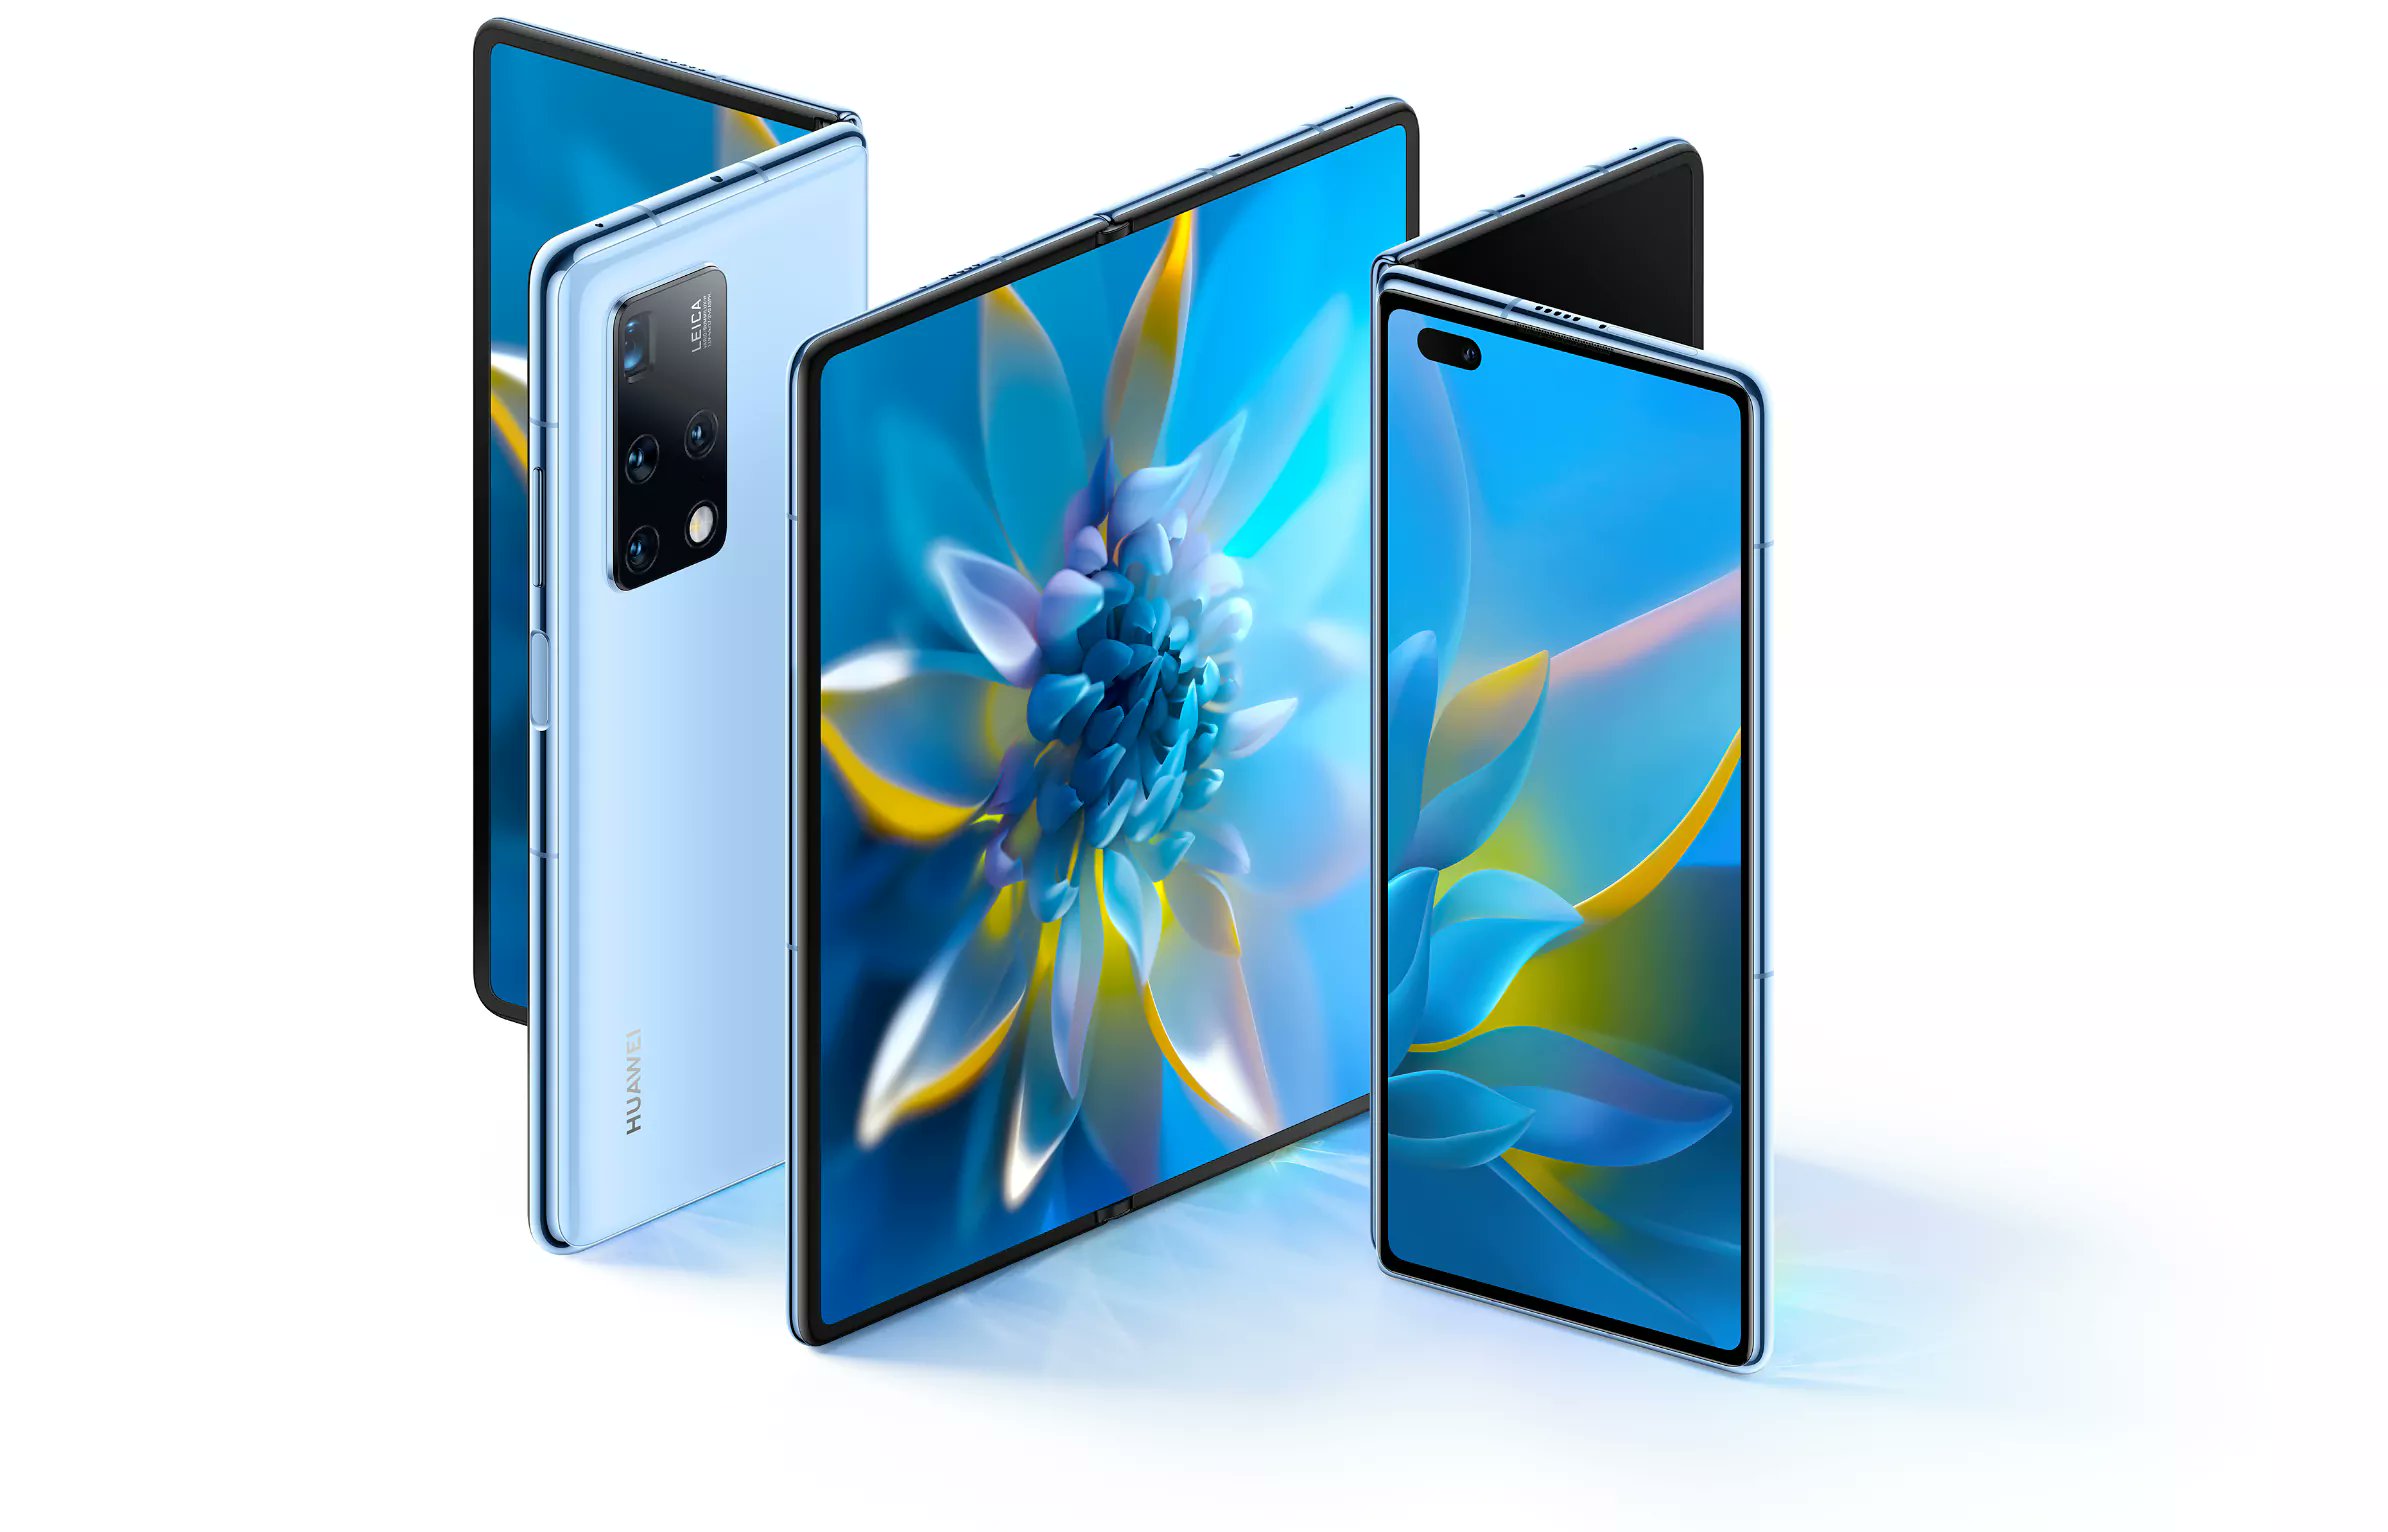 Meet Mate X2: Huawei's new 5G foldable phone that costs a whopping 2 lakh rupees